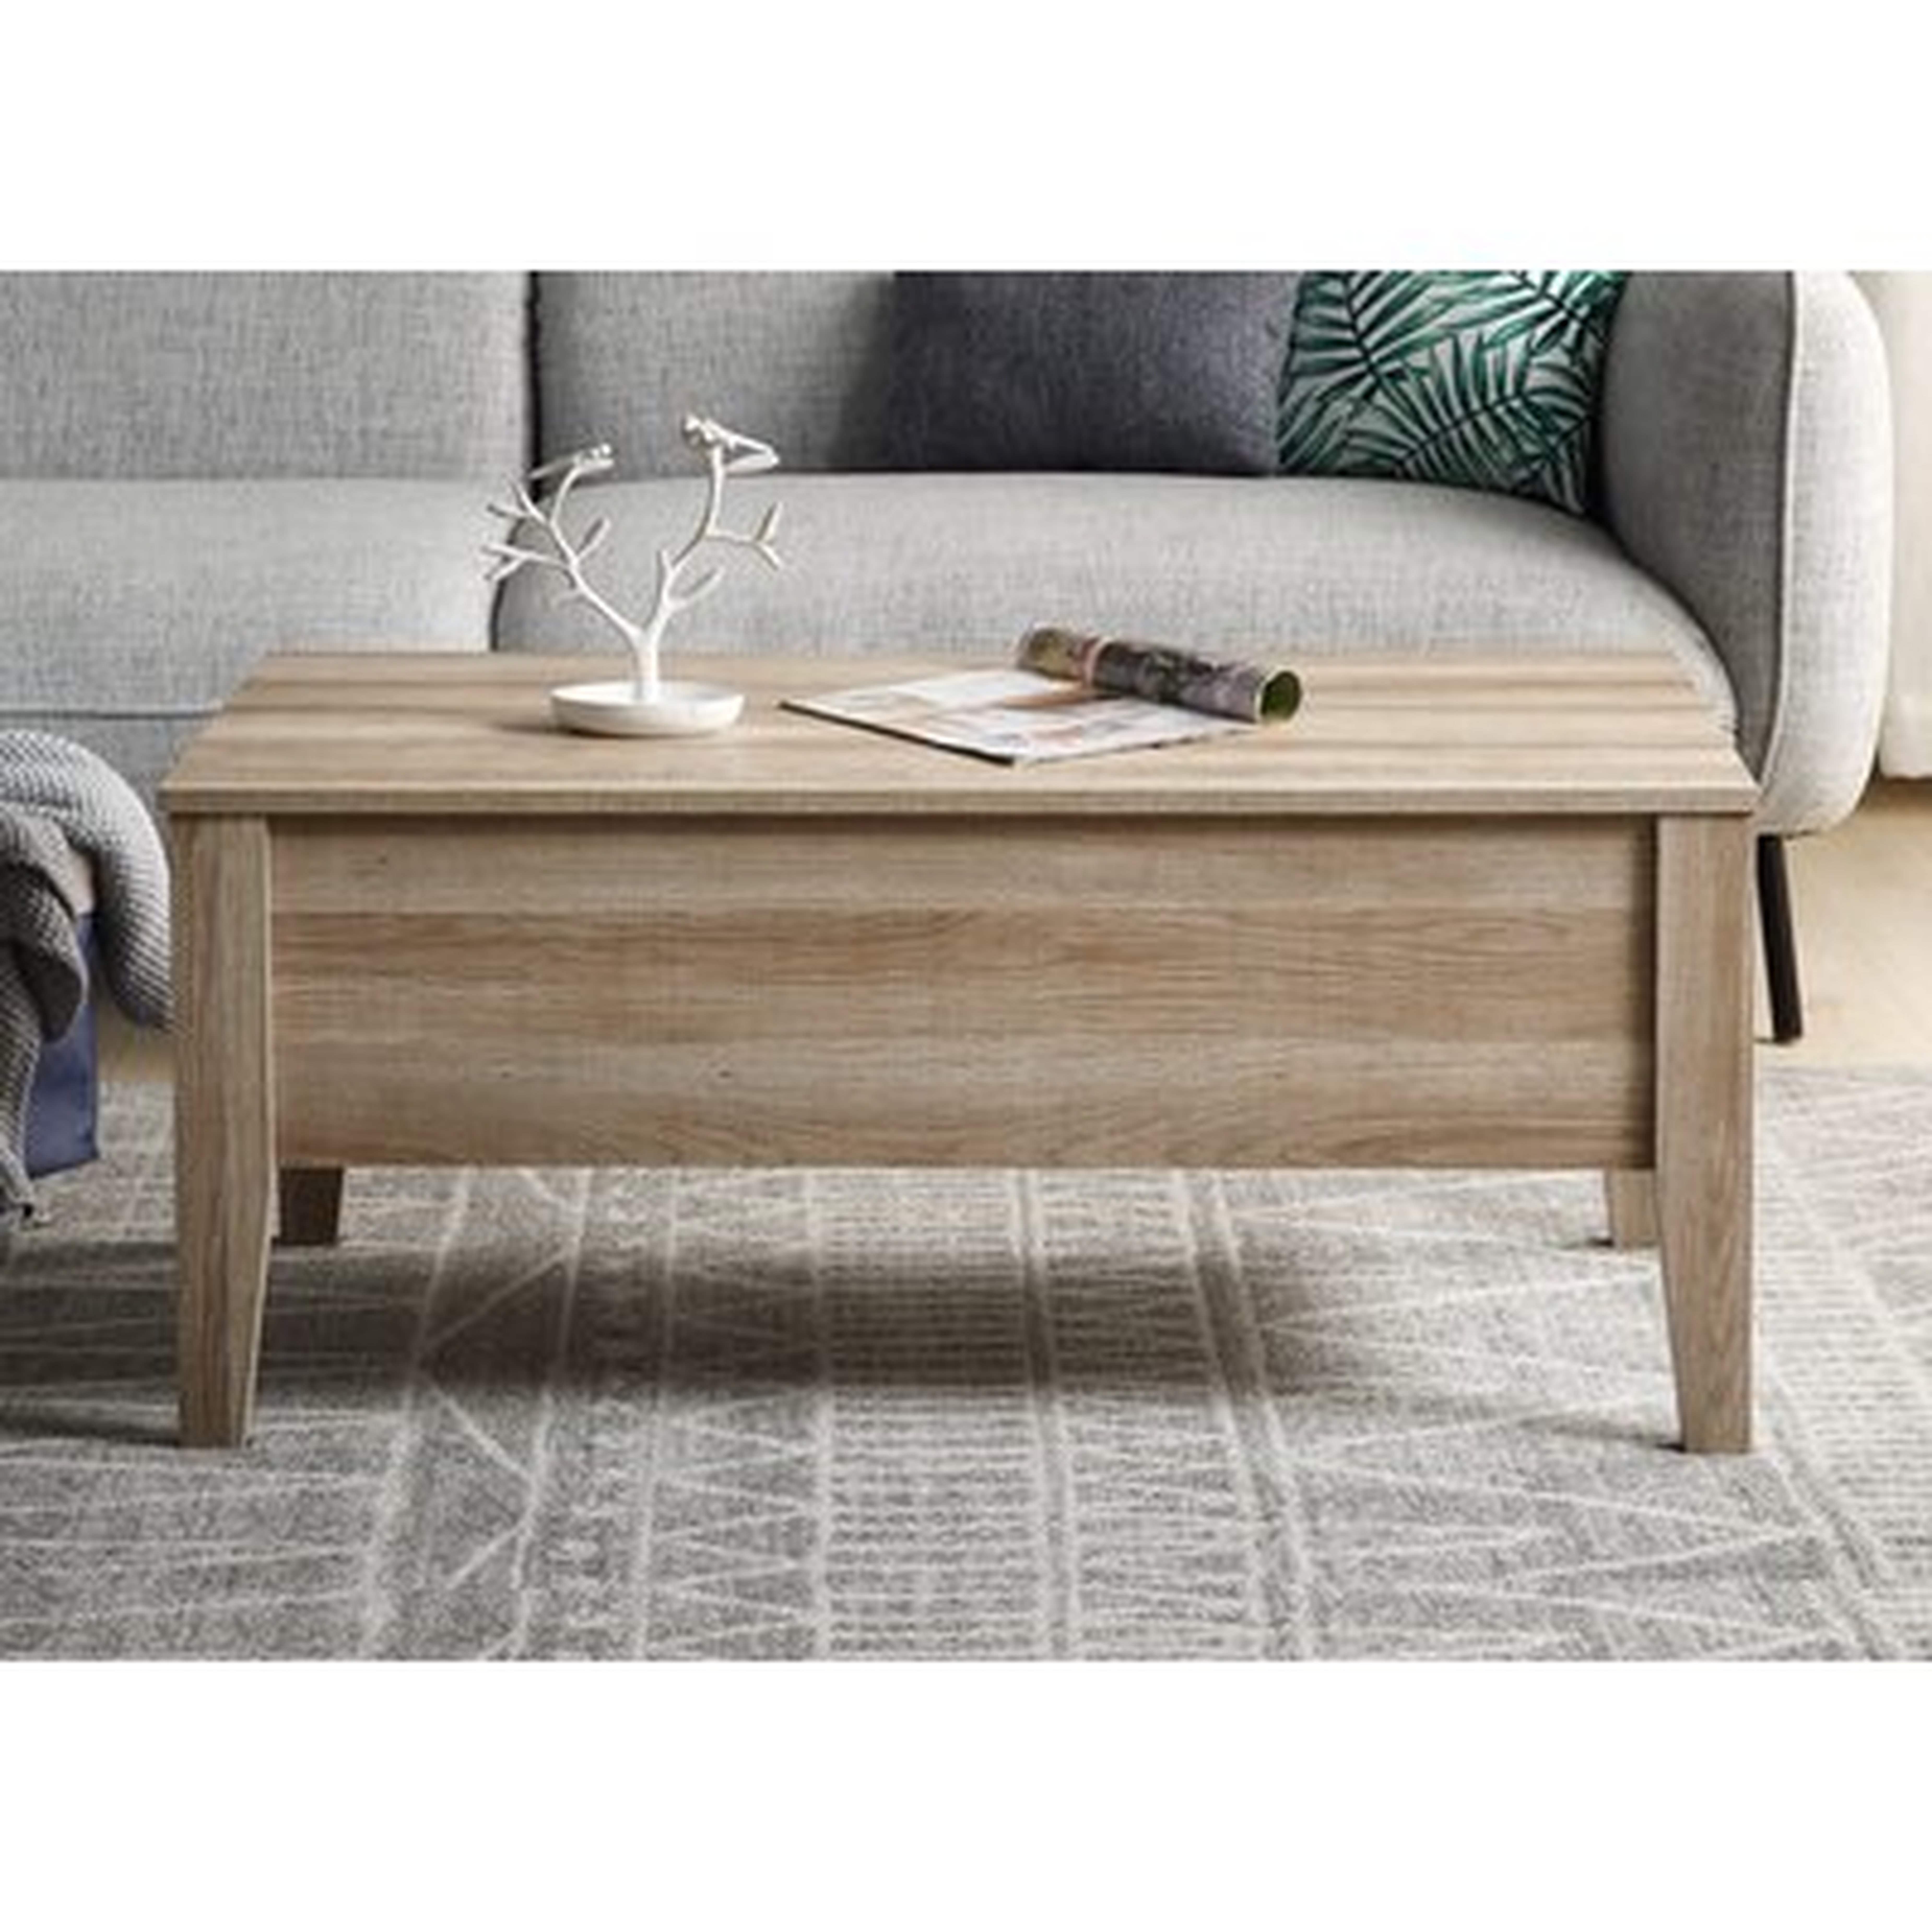 Mcmasters Lift Top Extendable Coffee Table with Storage - Wayfair